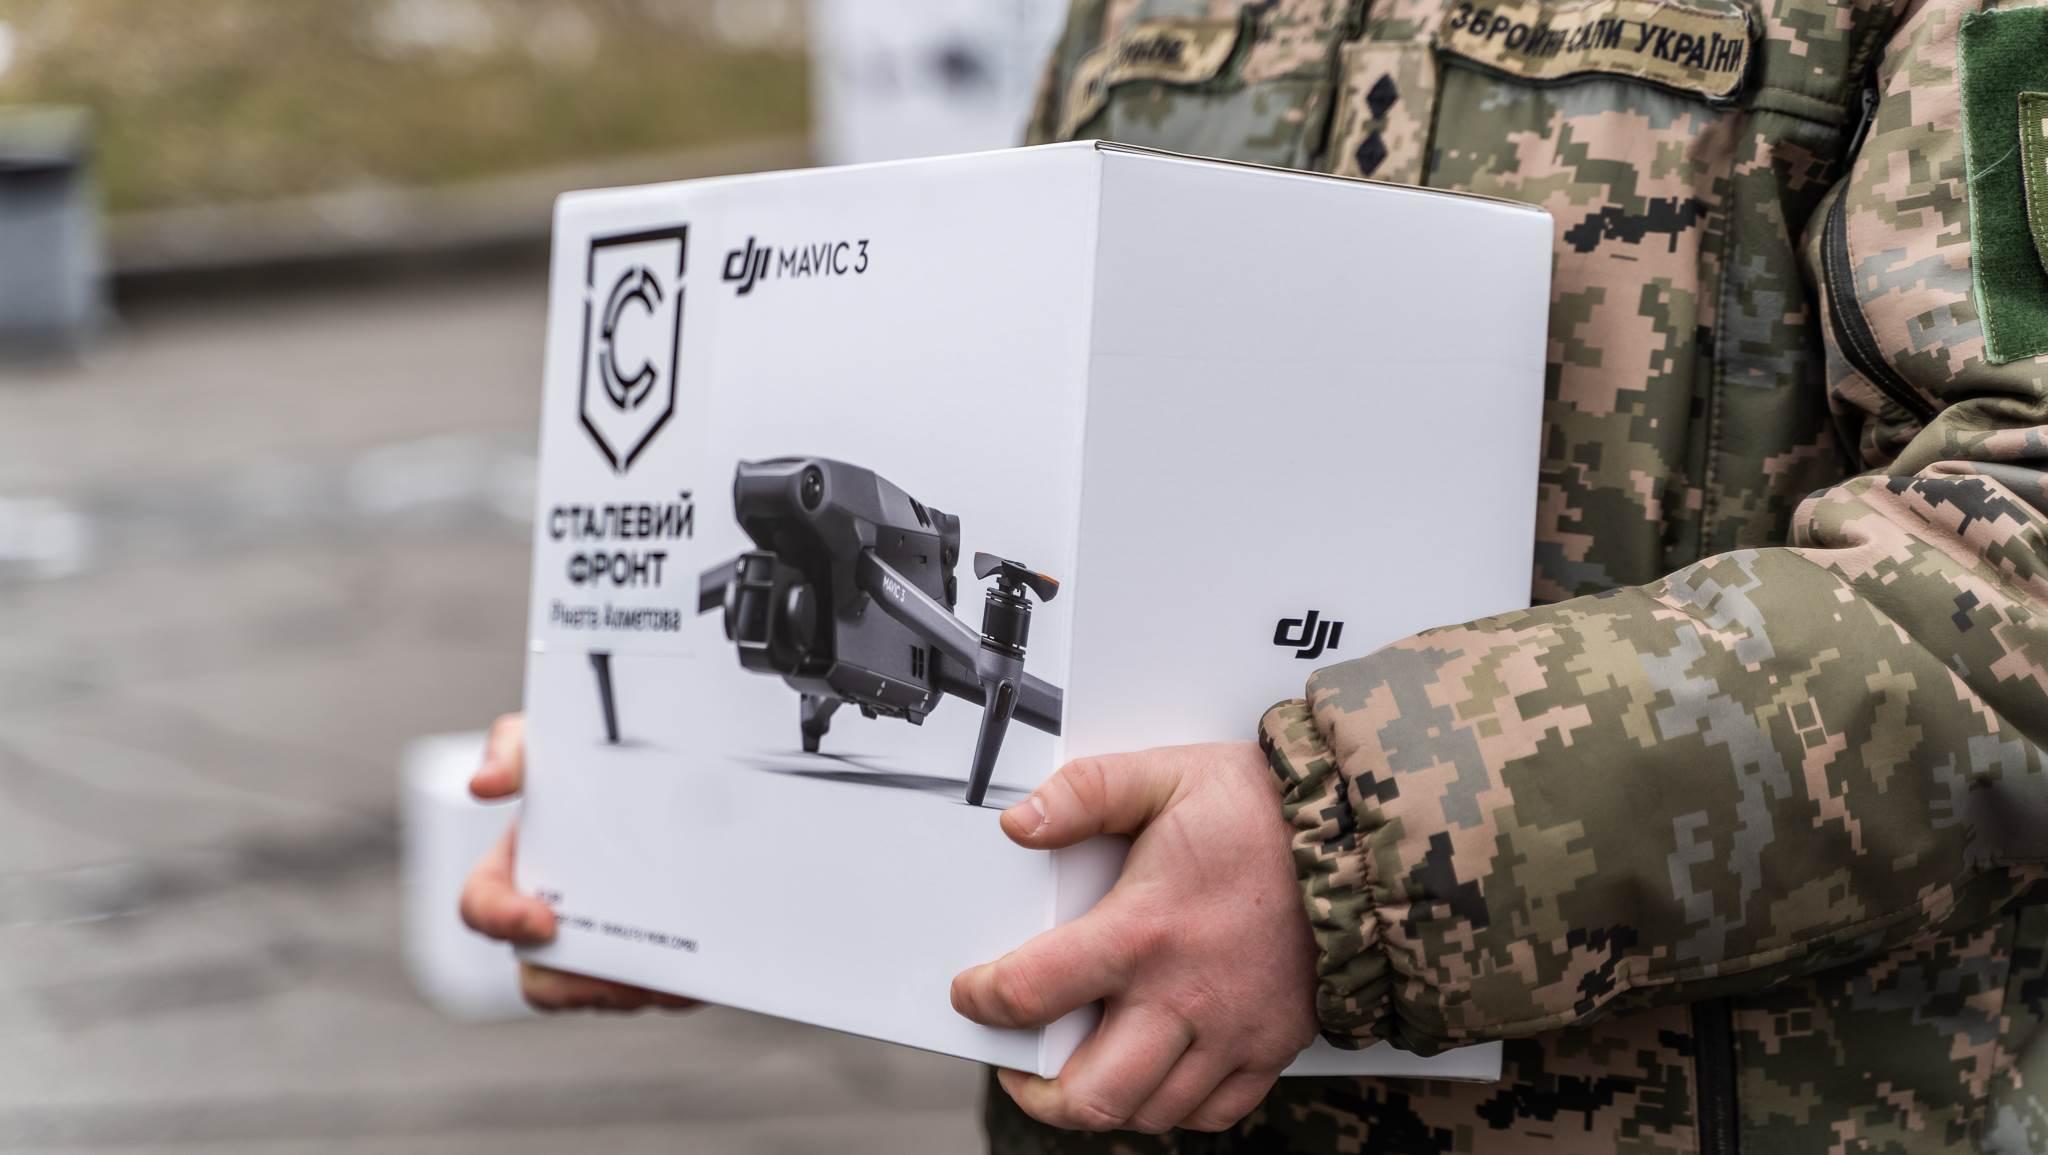 Metinvest donates 100 DJI Mavic 3 drones to the Ukrainian Armed Forces worth over UAH 10 million